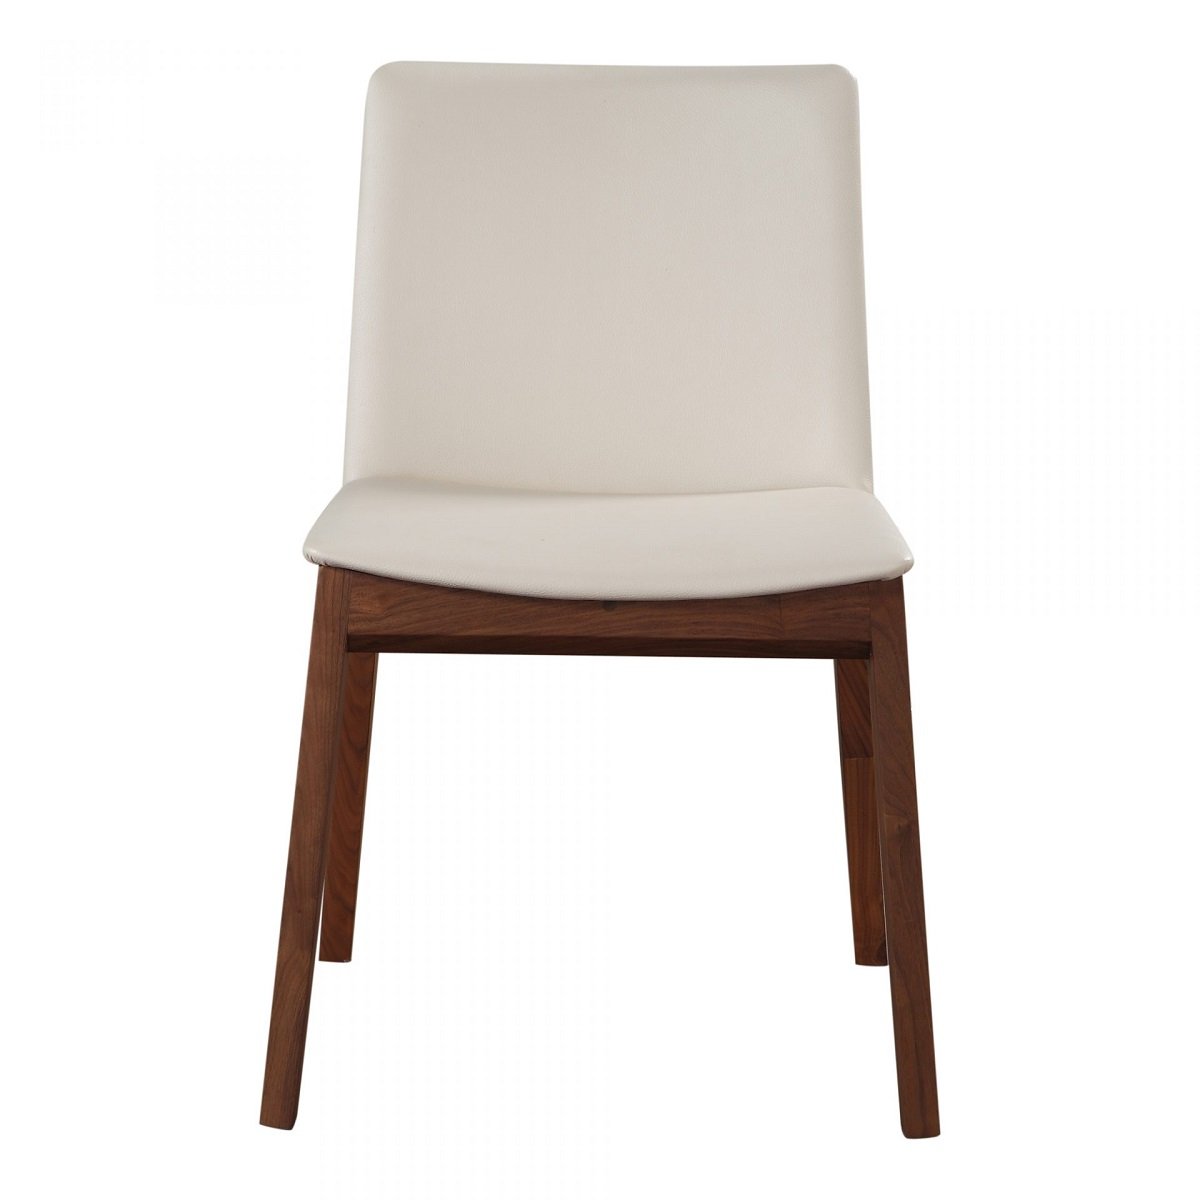 Load image into Gallery viewer, Deco Dining Chair White Pvc-M2 (Set of 2) Dining Chairs Moe&amp;#39;s     Four Hands, Burke Decor, Mid Century Modern Furniture, Old Bones Furniture Company, Old Bones Co, Modern Mid Century, Designer Furniture, https://www.oldbonesco.com/
